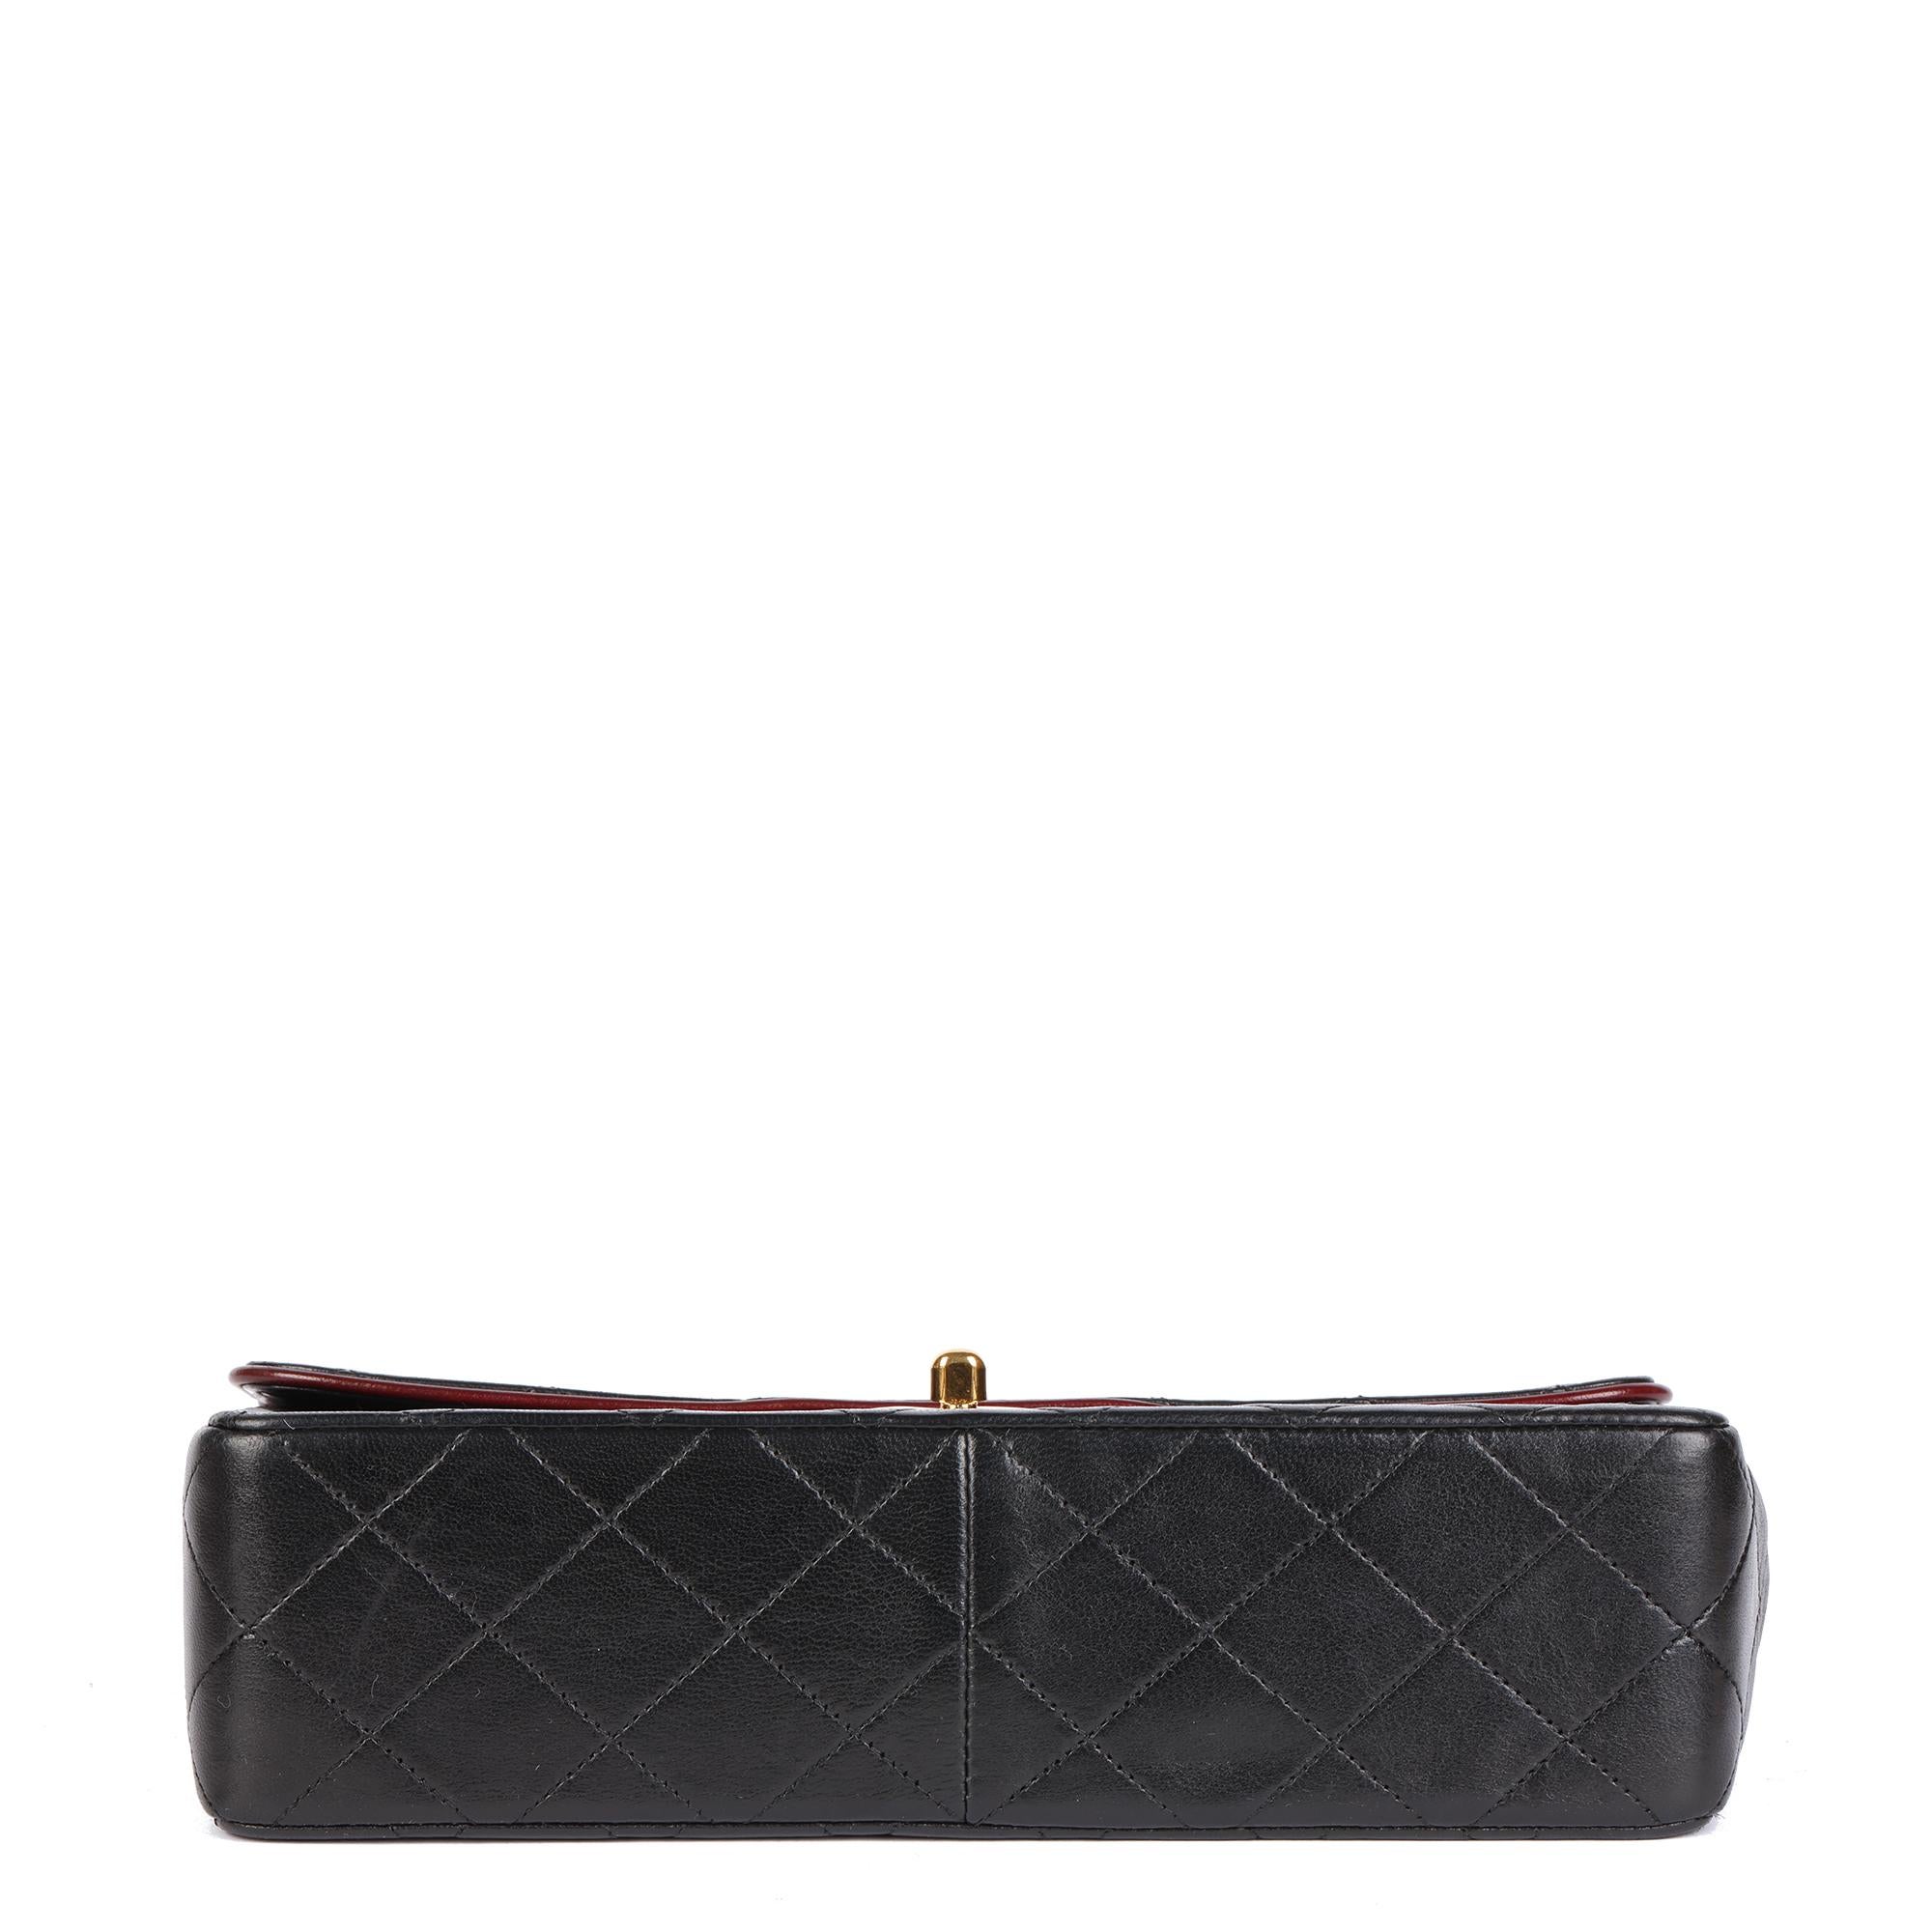 CHANEL Black Quilted Lambskin Vintage Medium Classic Single Flap Bag with Red Tr For Sale 1